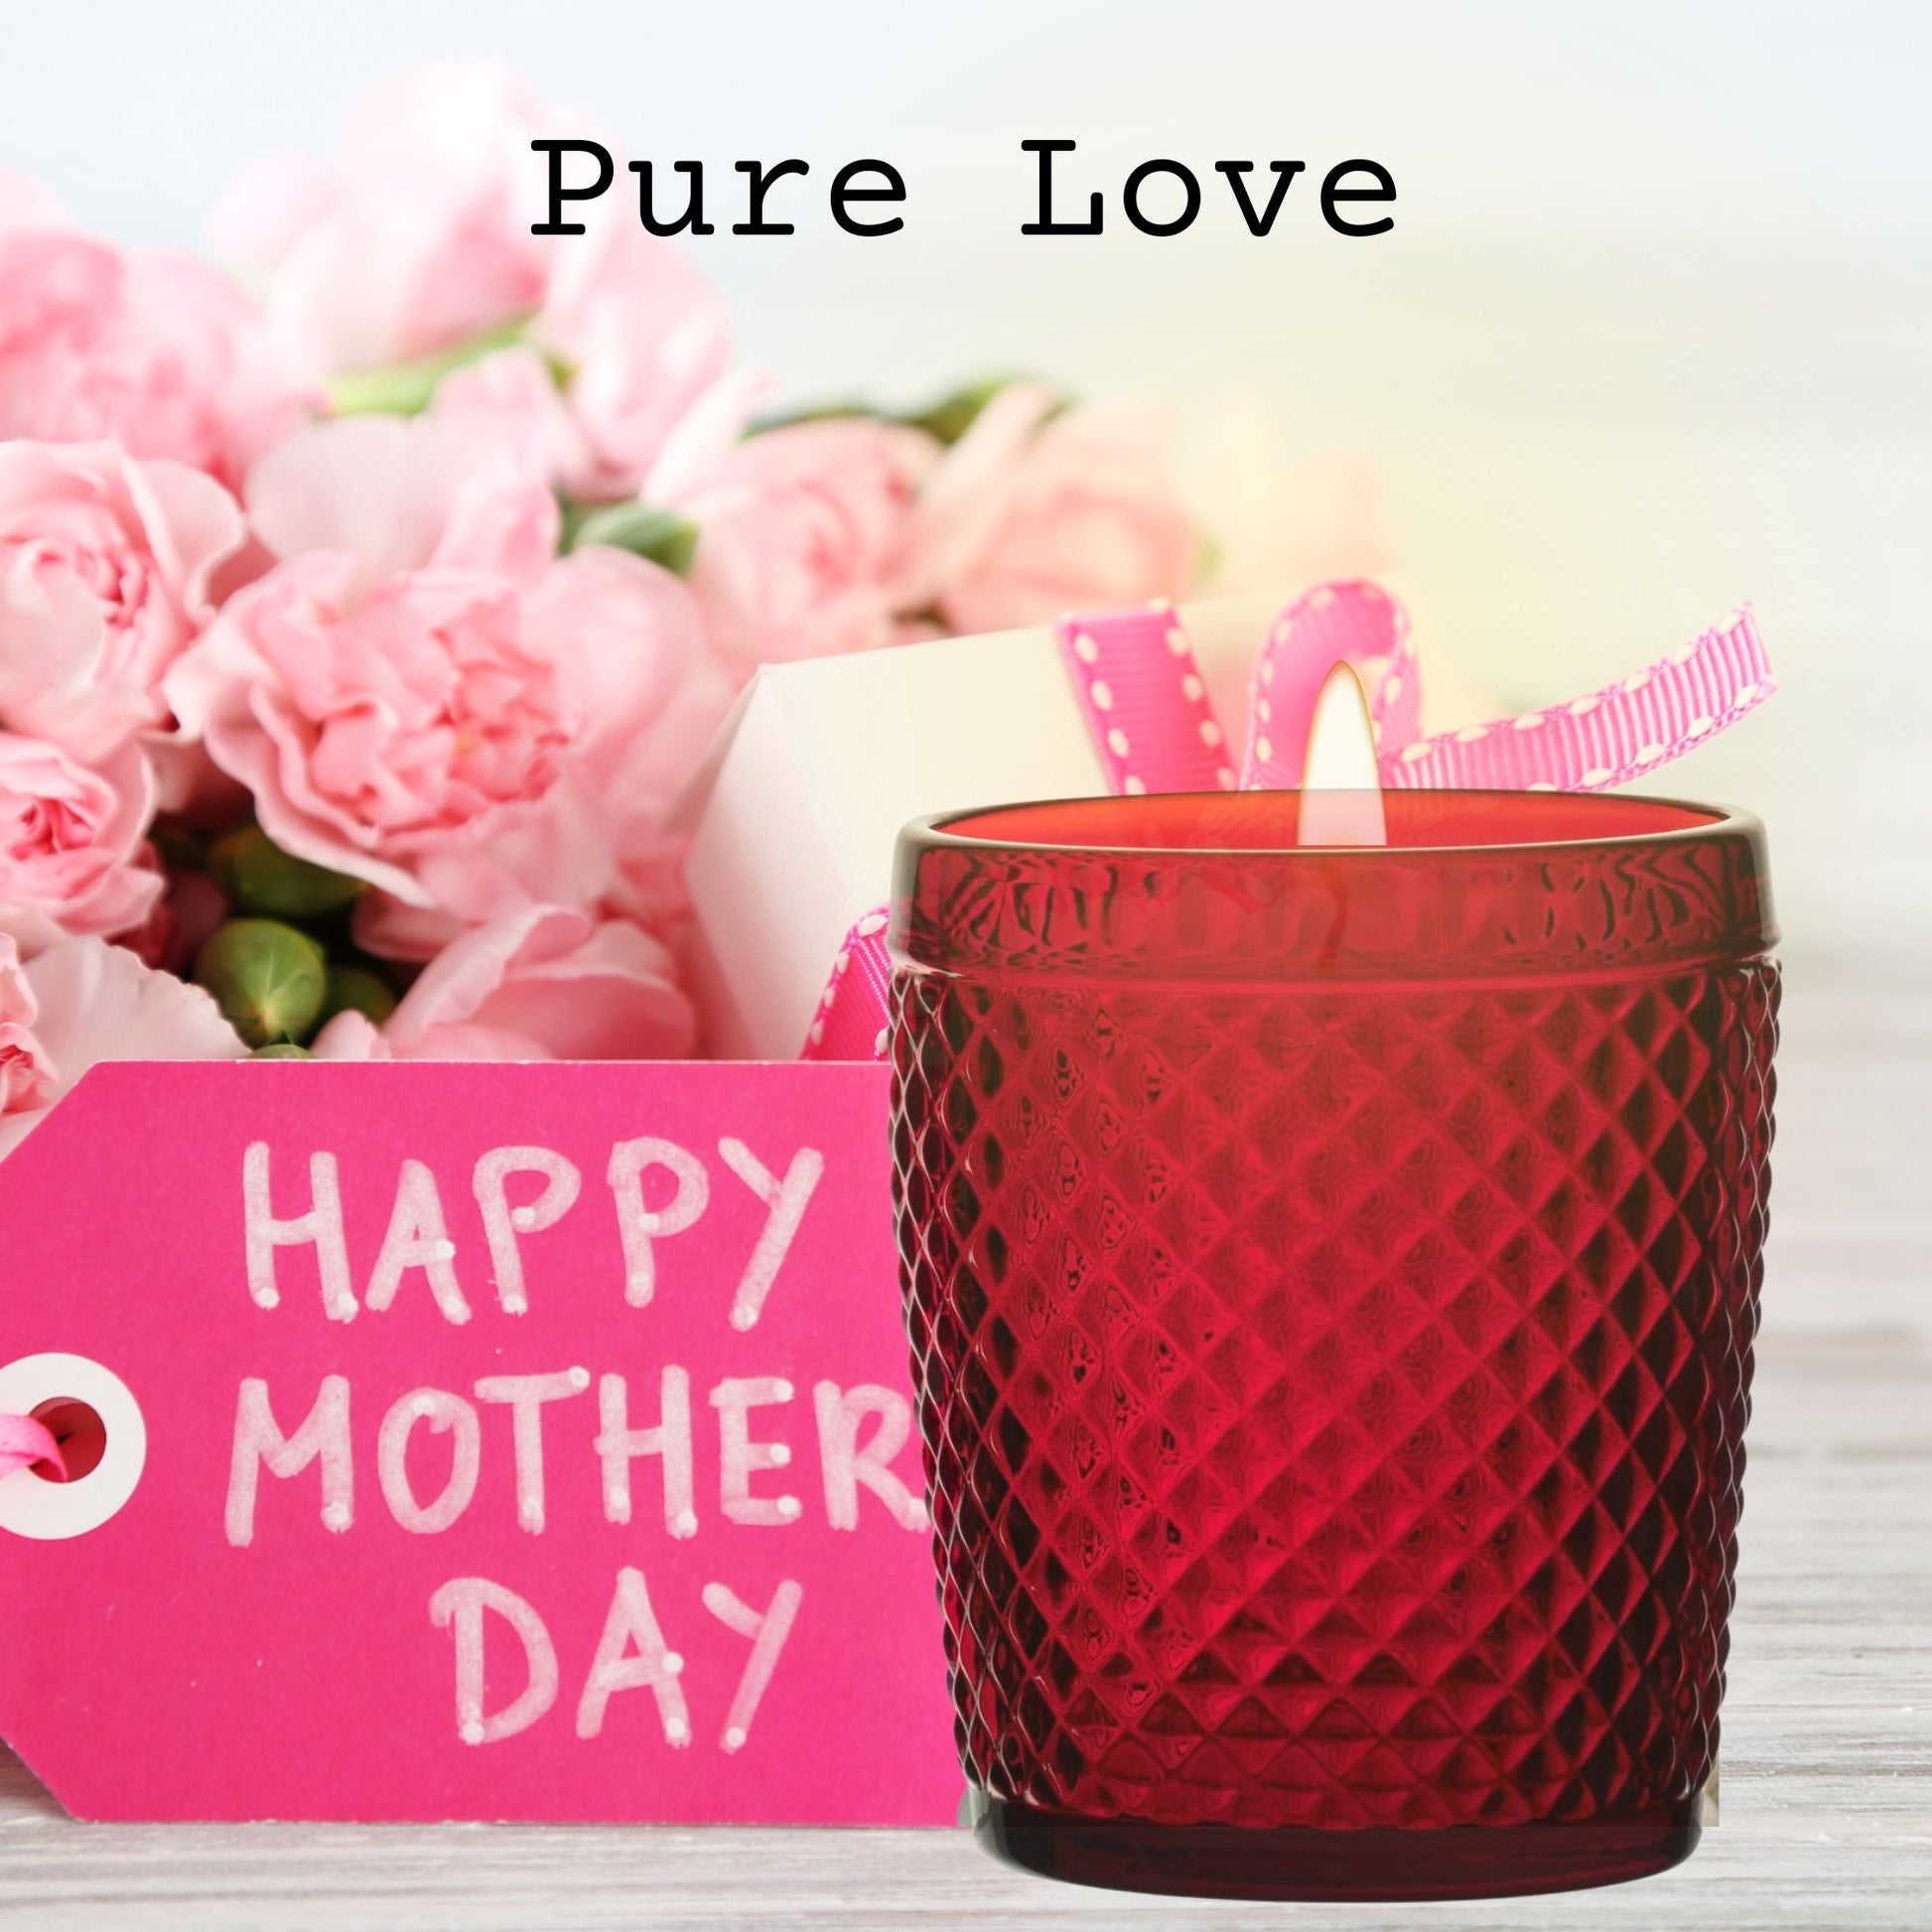 Pure love soy candle - mother's day-1